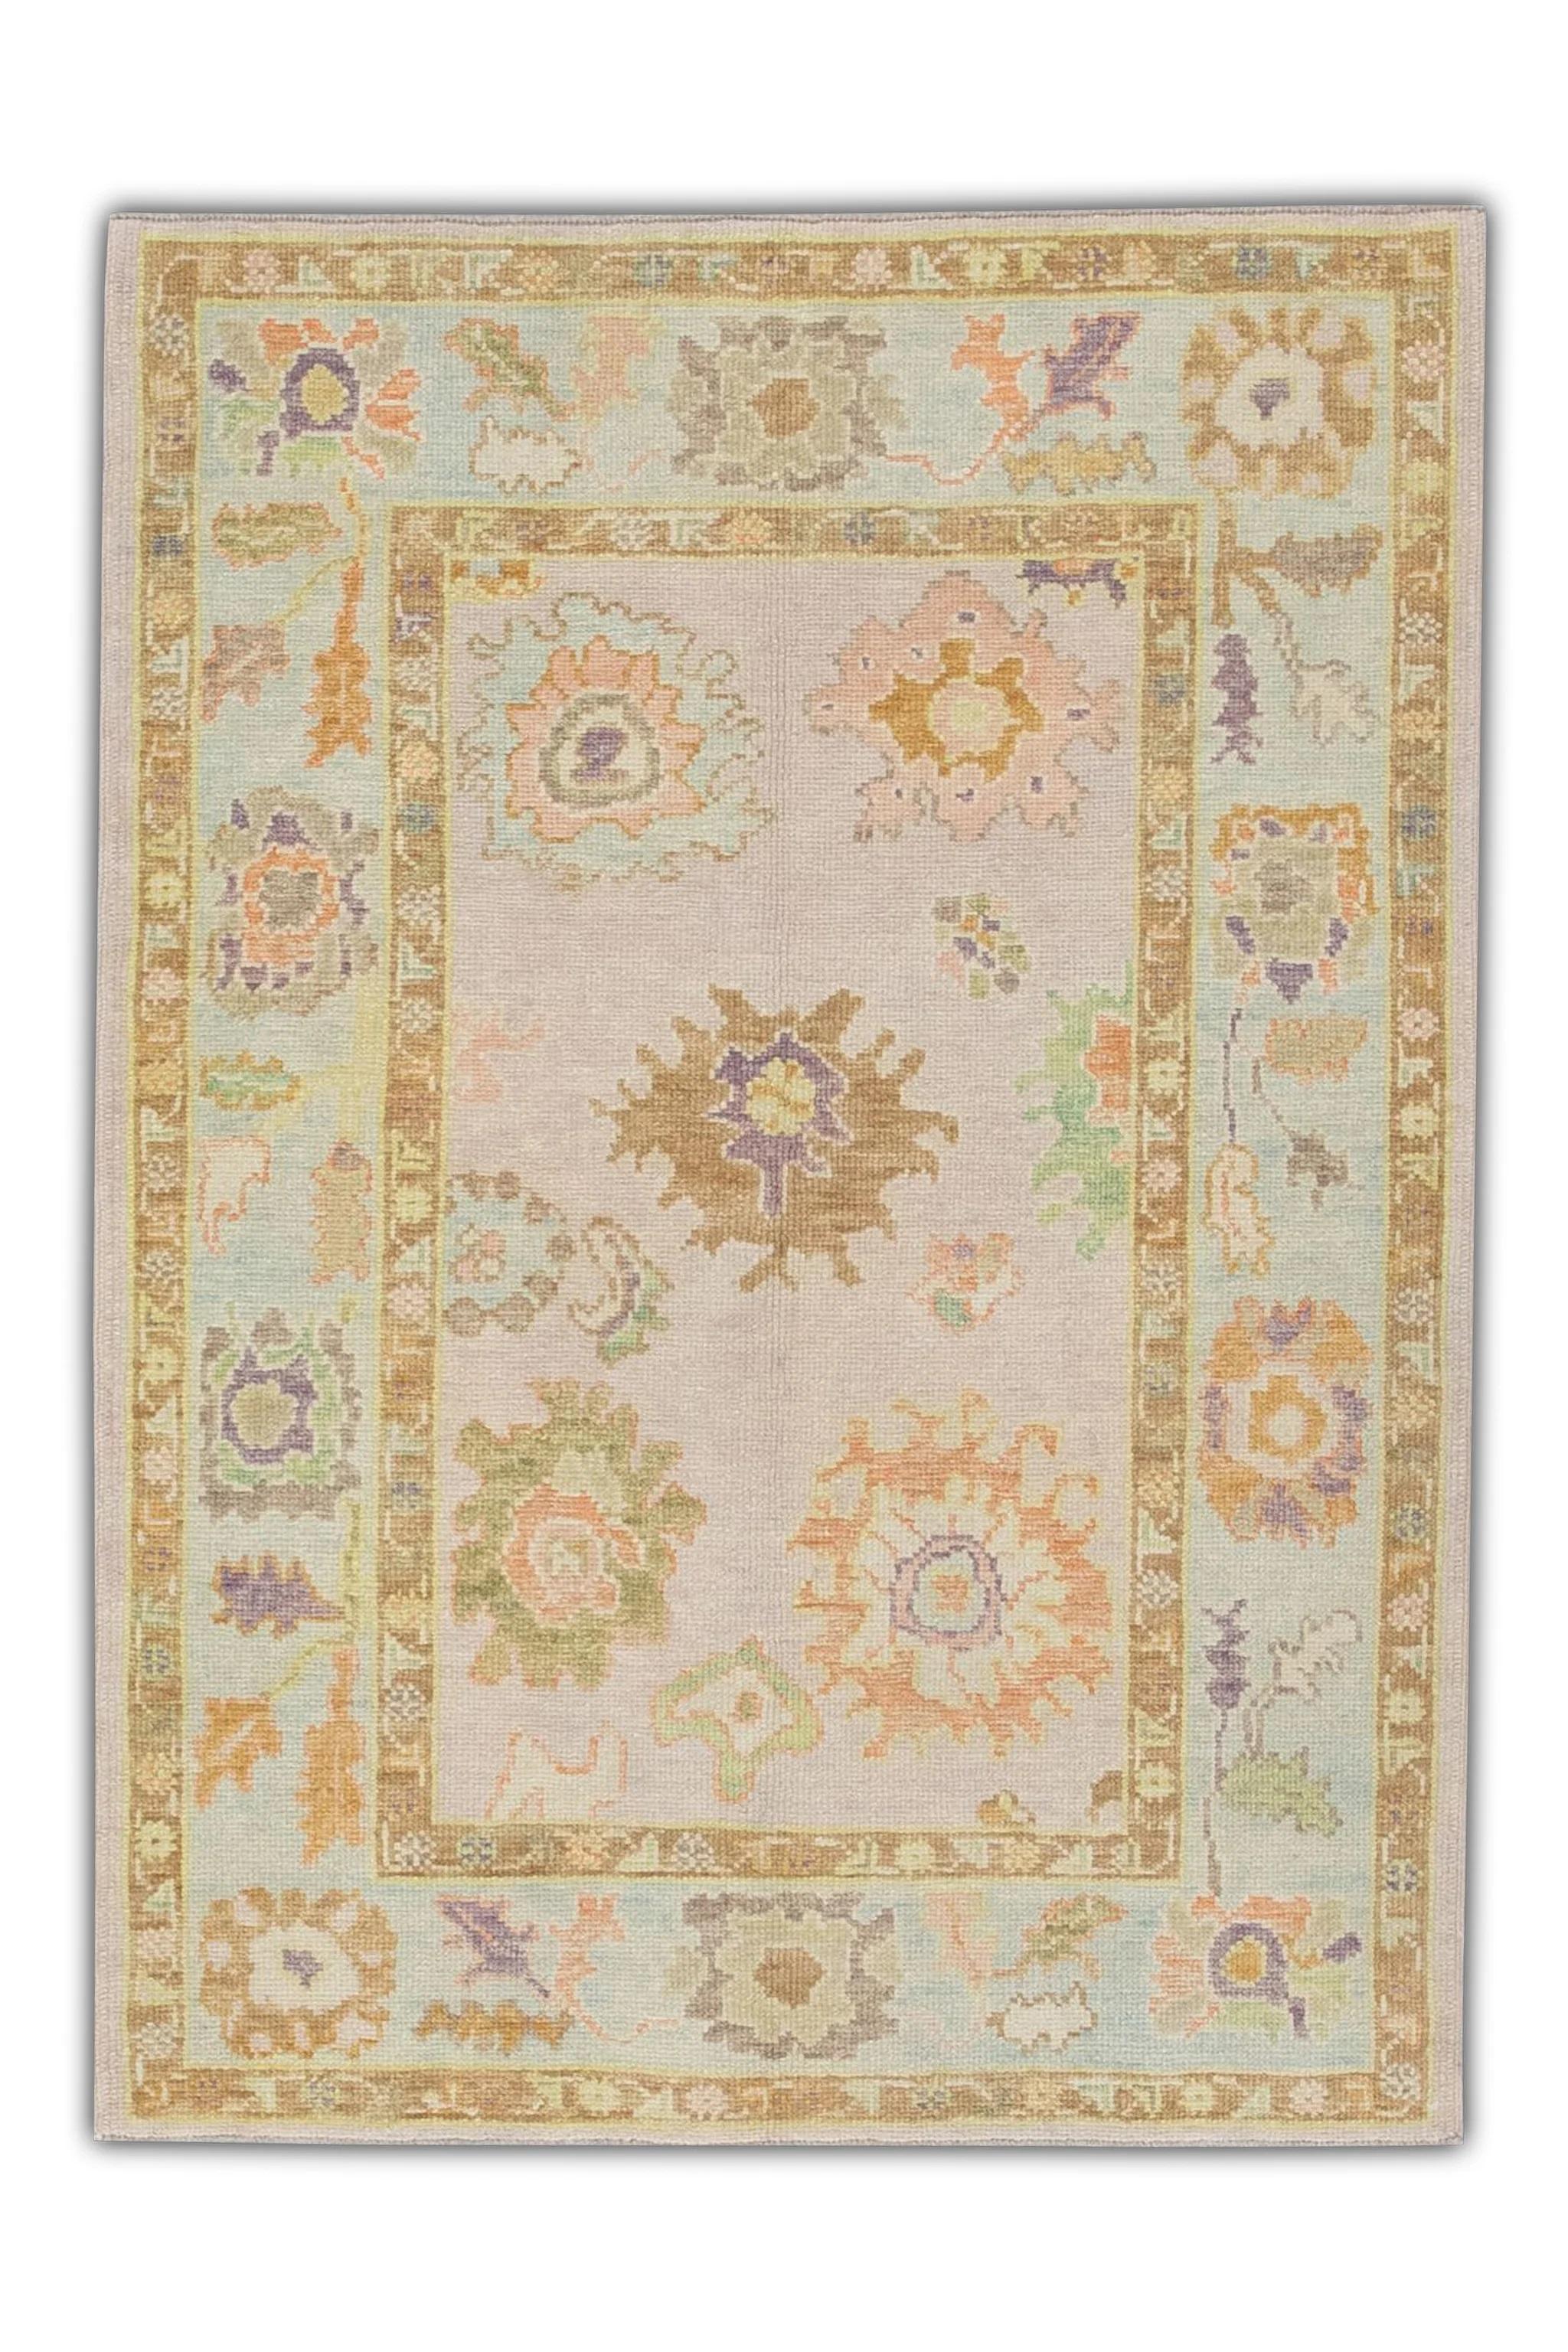 Handwoven Wool Turkish Oushak Rug Lilac Field Multicolor Floral Design 4'2 x 5'7 For Sale 4